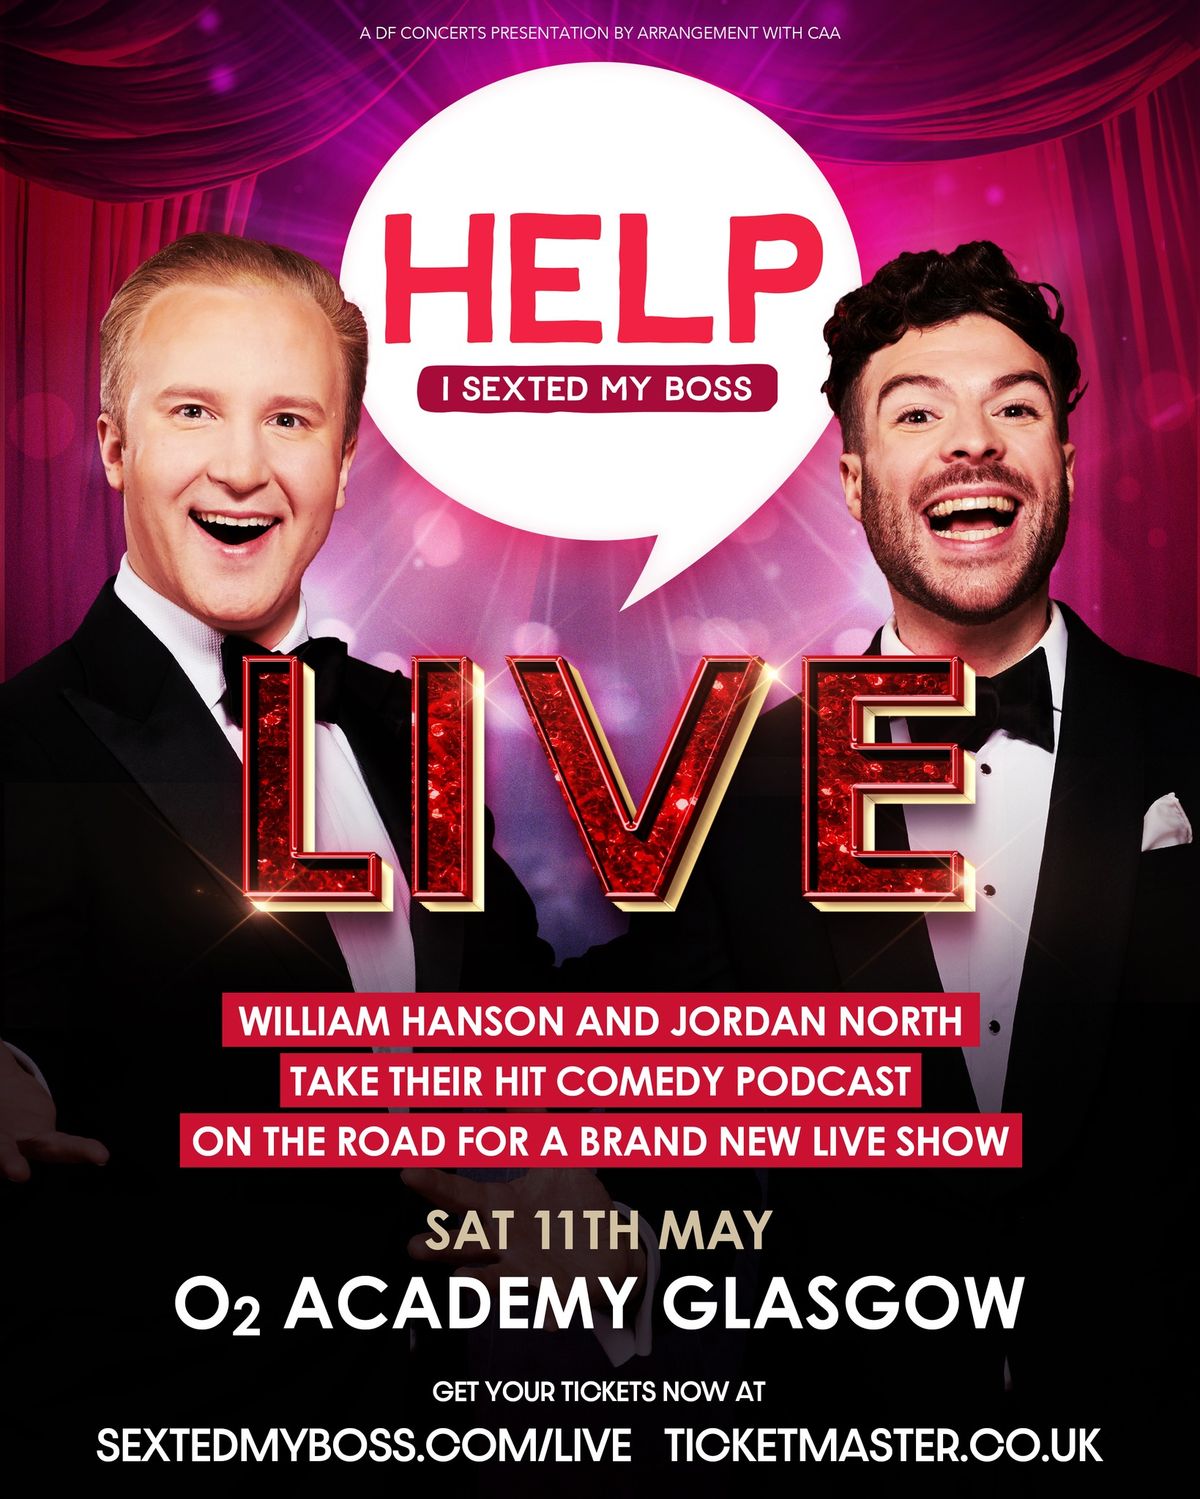 Help I Sexted My Boss | O2 Academy Glasgow - SOLD OUT